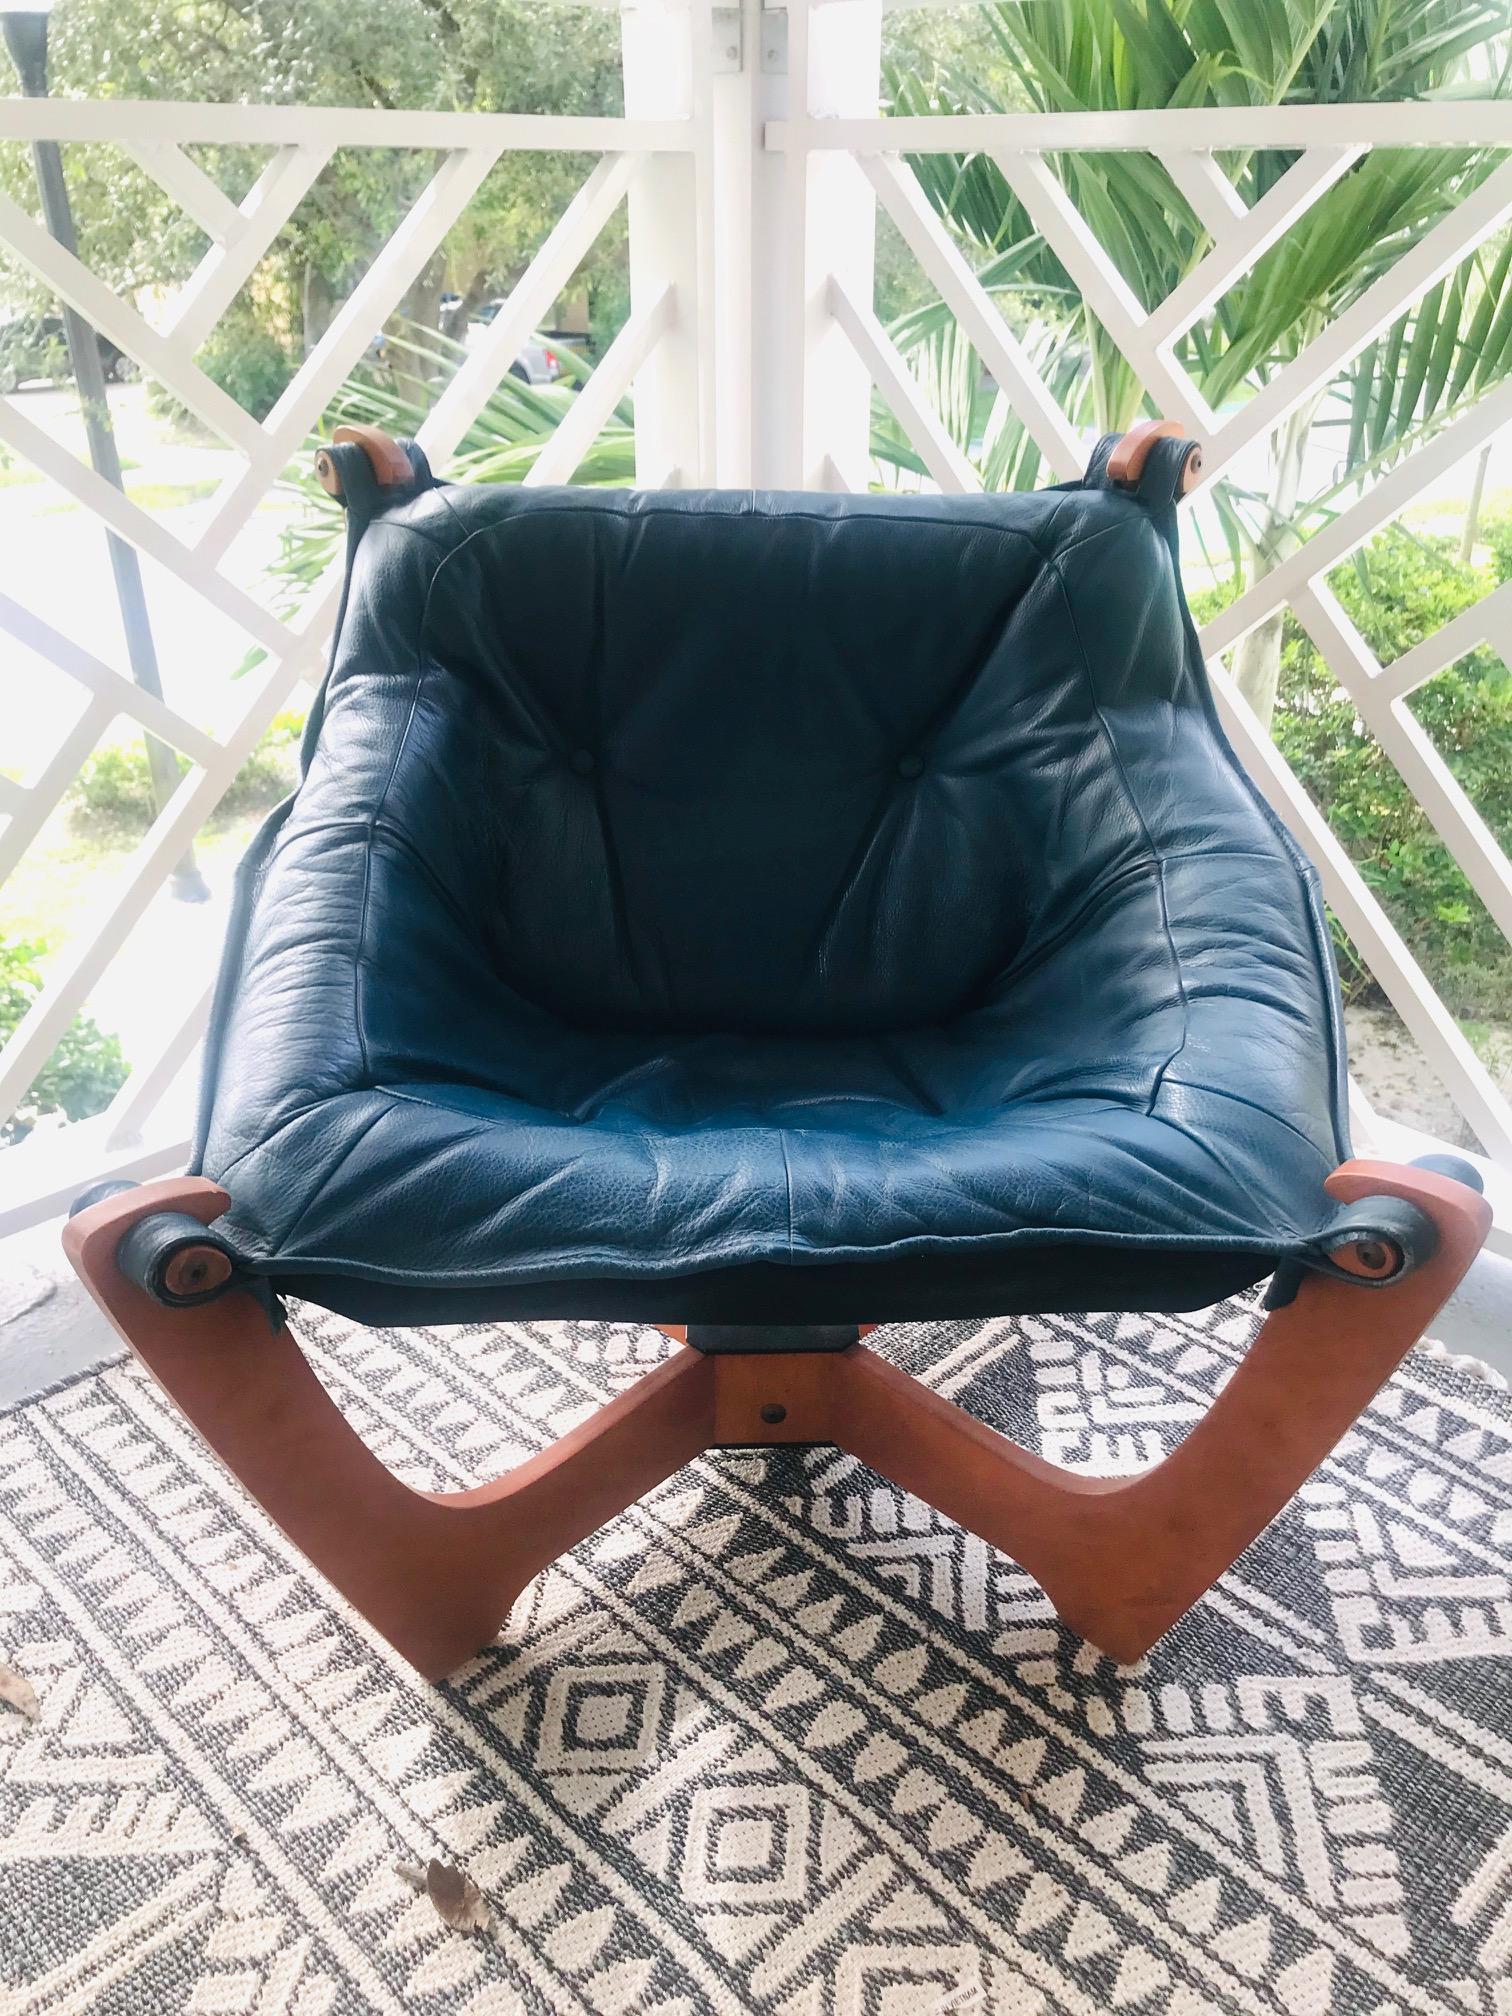 Molded 1970s Luna Lounge Chair by Odd Knutsen in Cadet Blue Leather, Norway